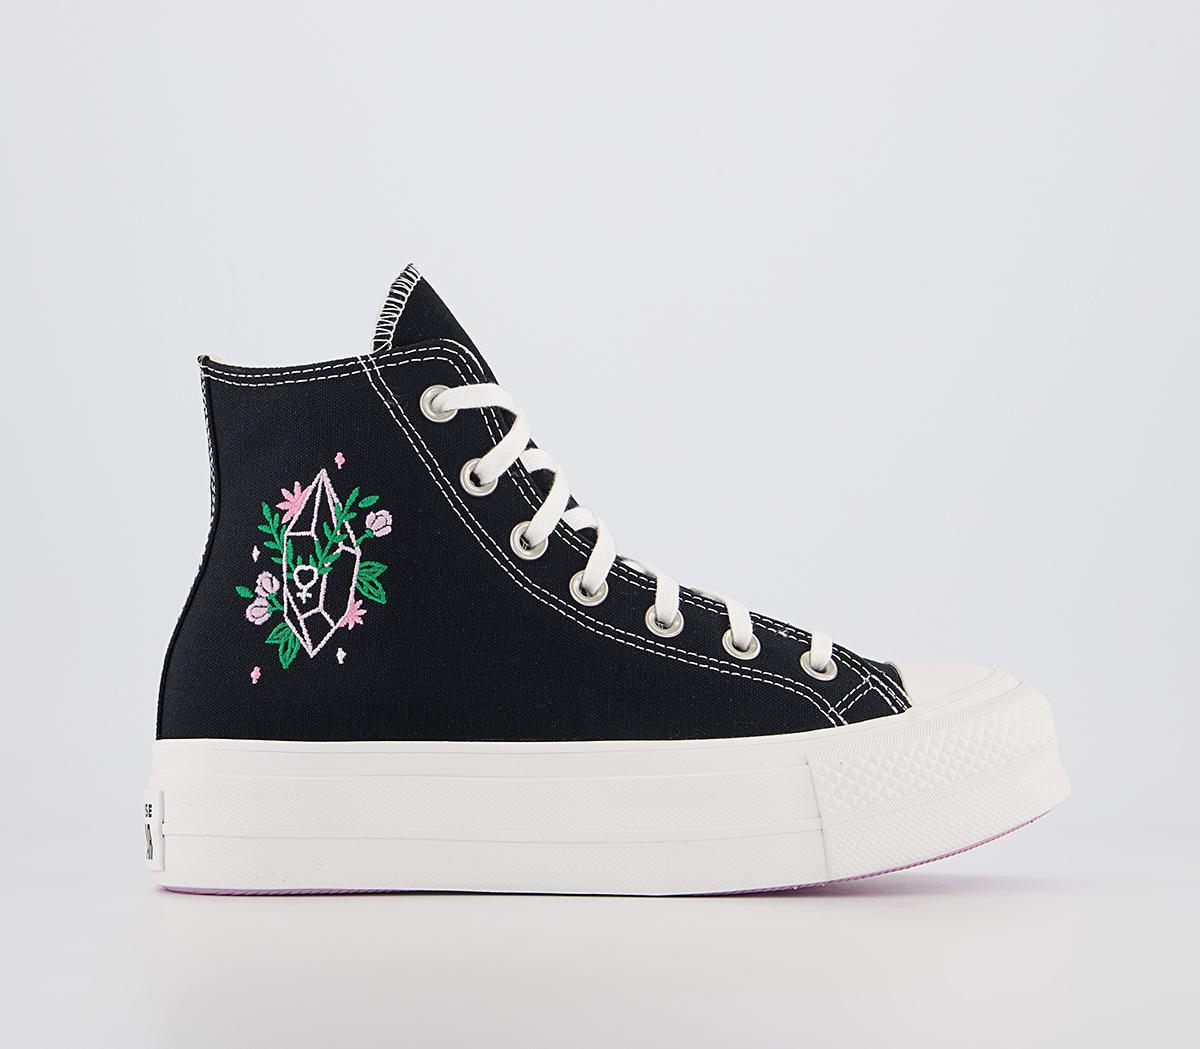 Genoplive Uskyld Macadam Converse All Star Lift Hi Platform Trainers Black Vintage White Artic Pink  Crystal - Women's Trainers